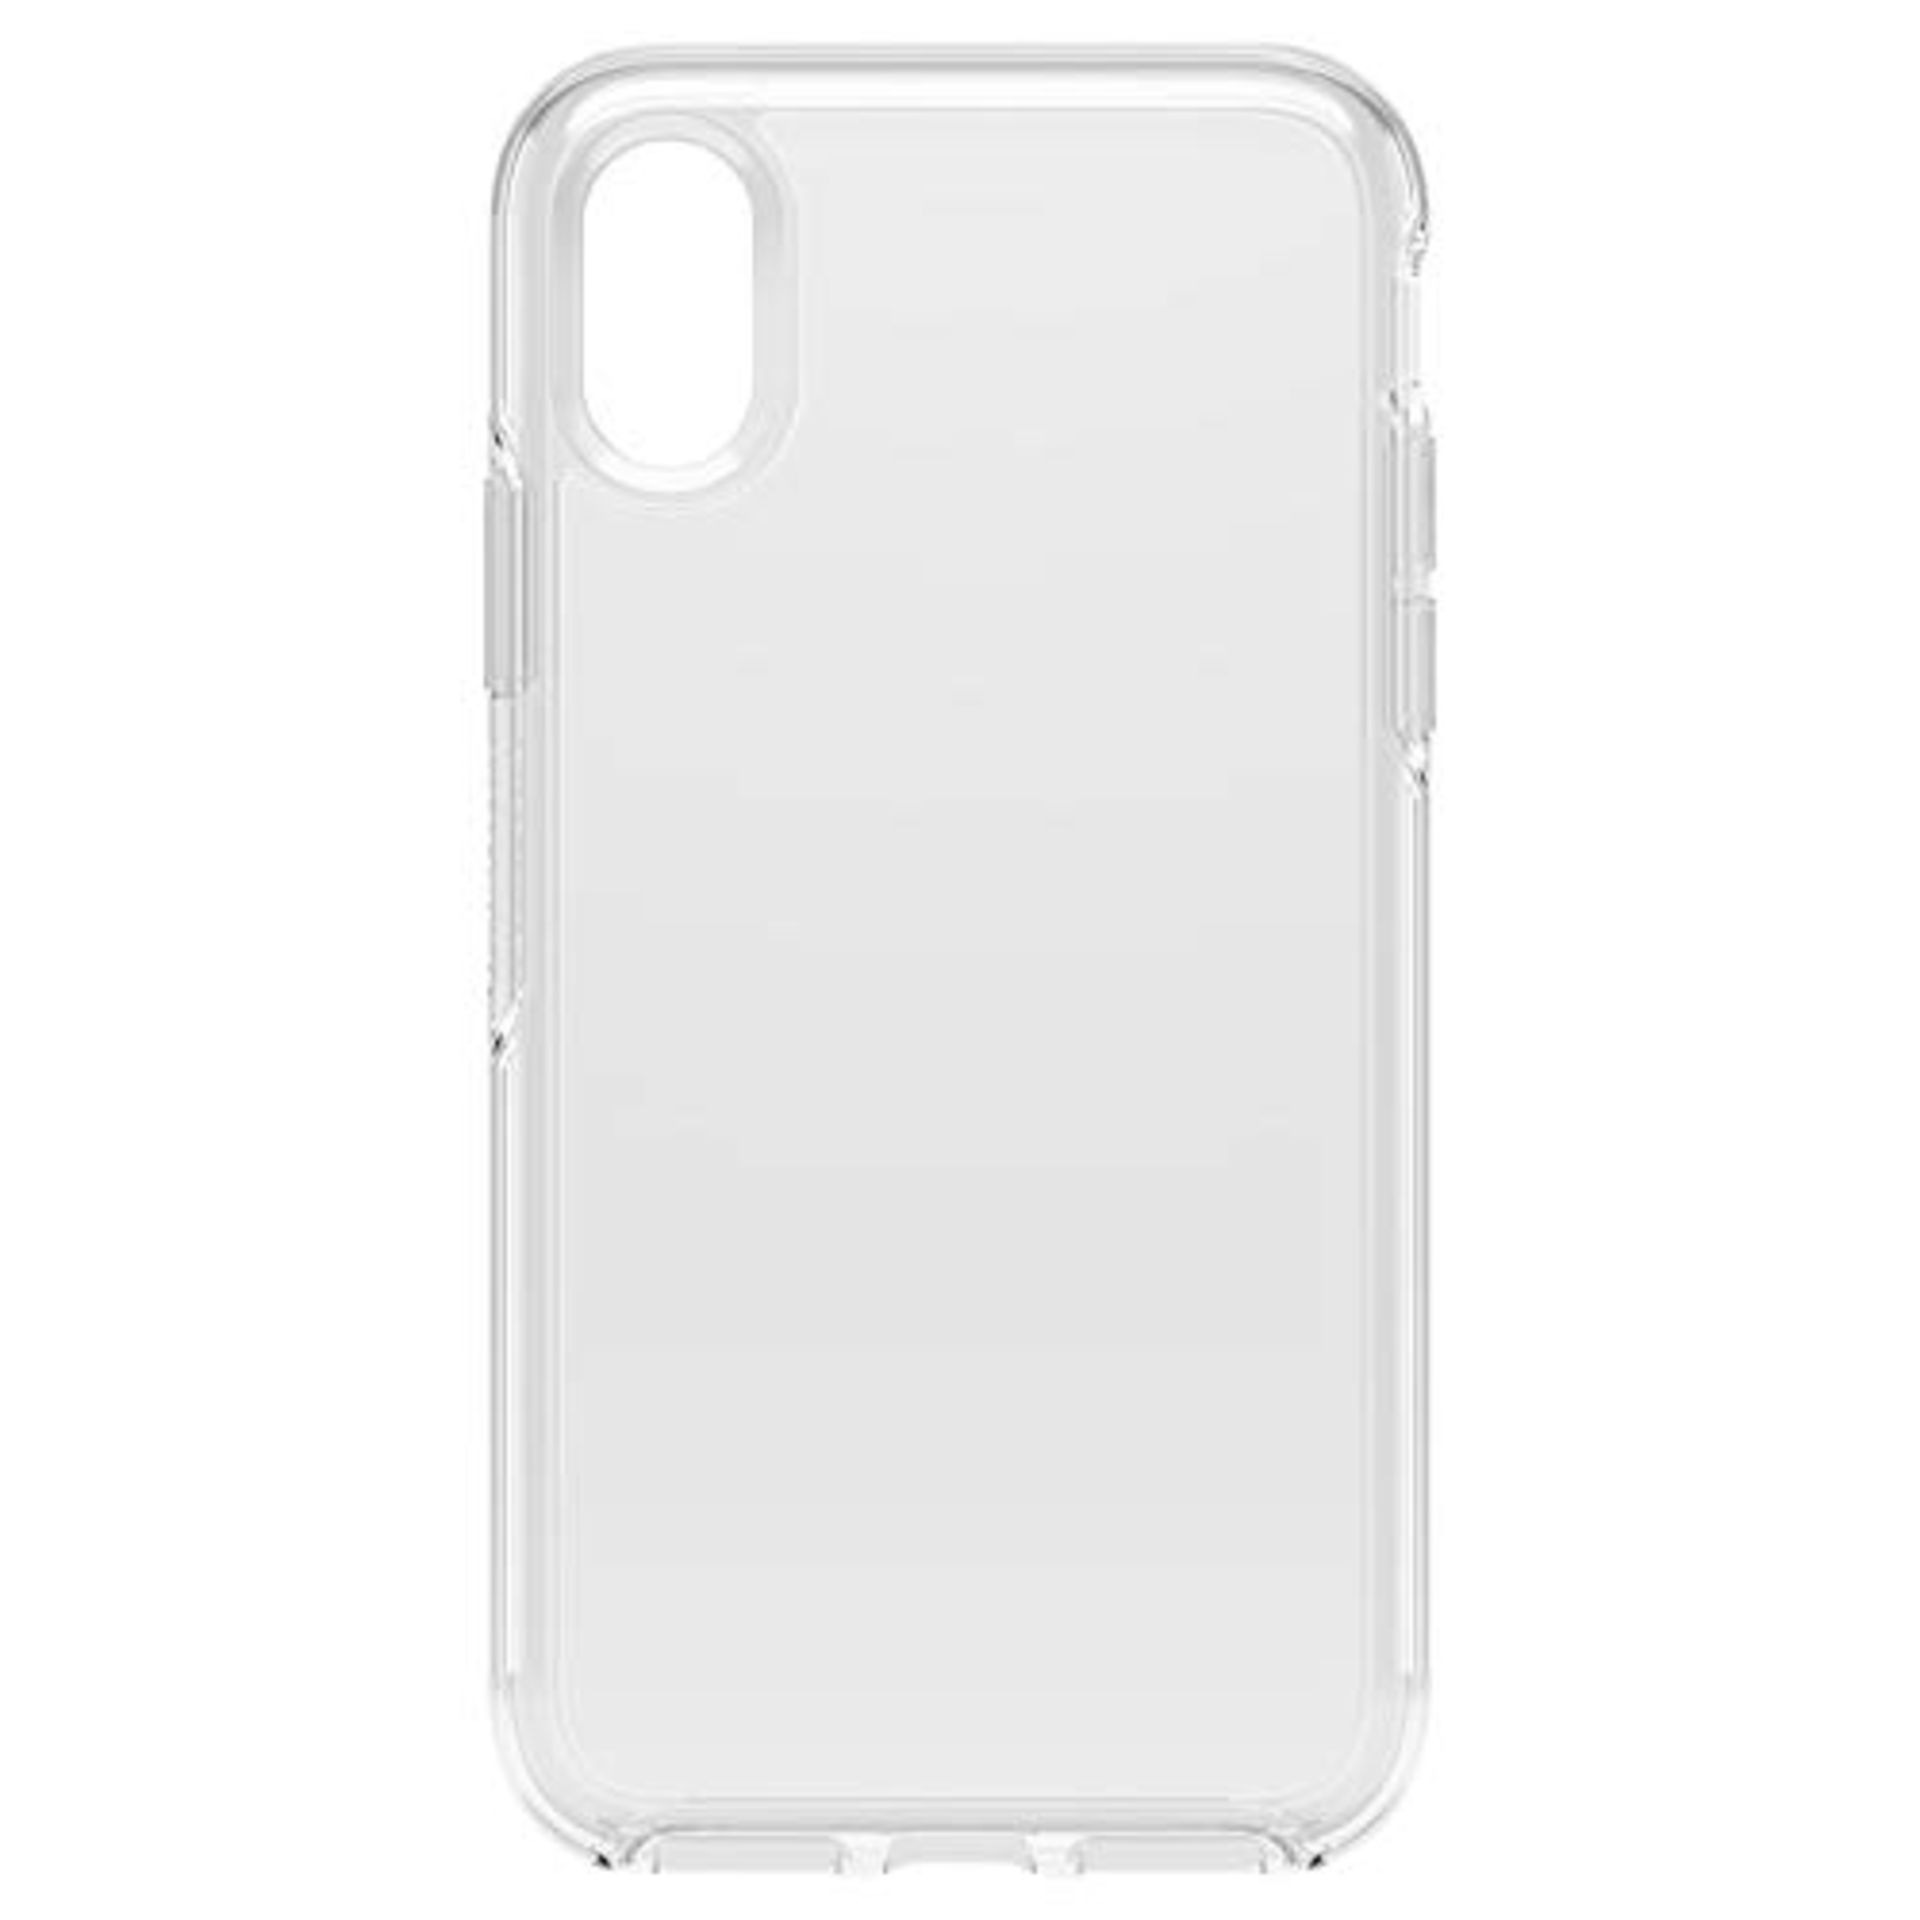 OtterBox 77-59608 for Apple iPhone X/Xs, Sleek Drop Proof Protective Clear Case, Symme